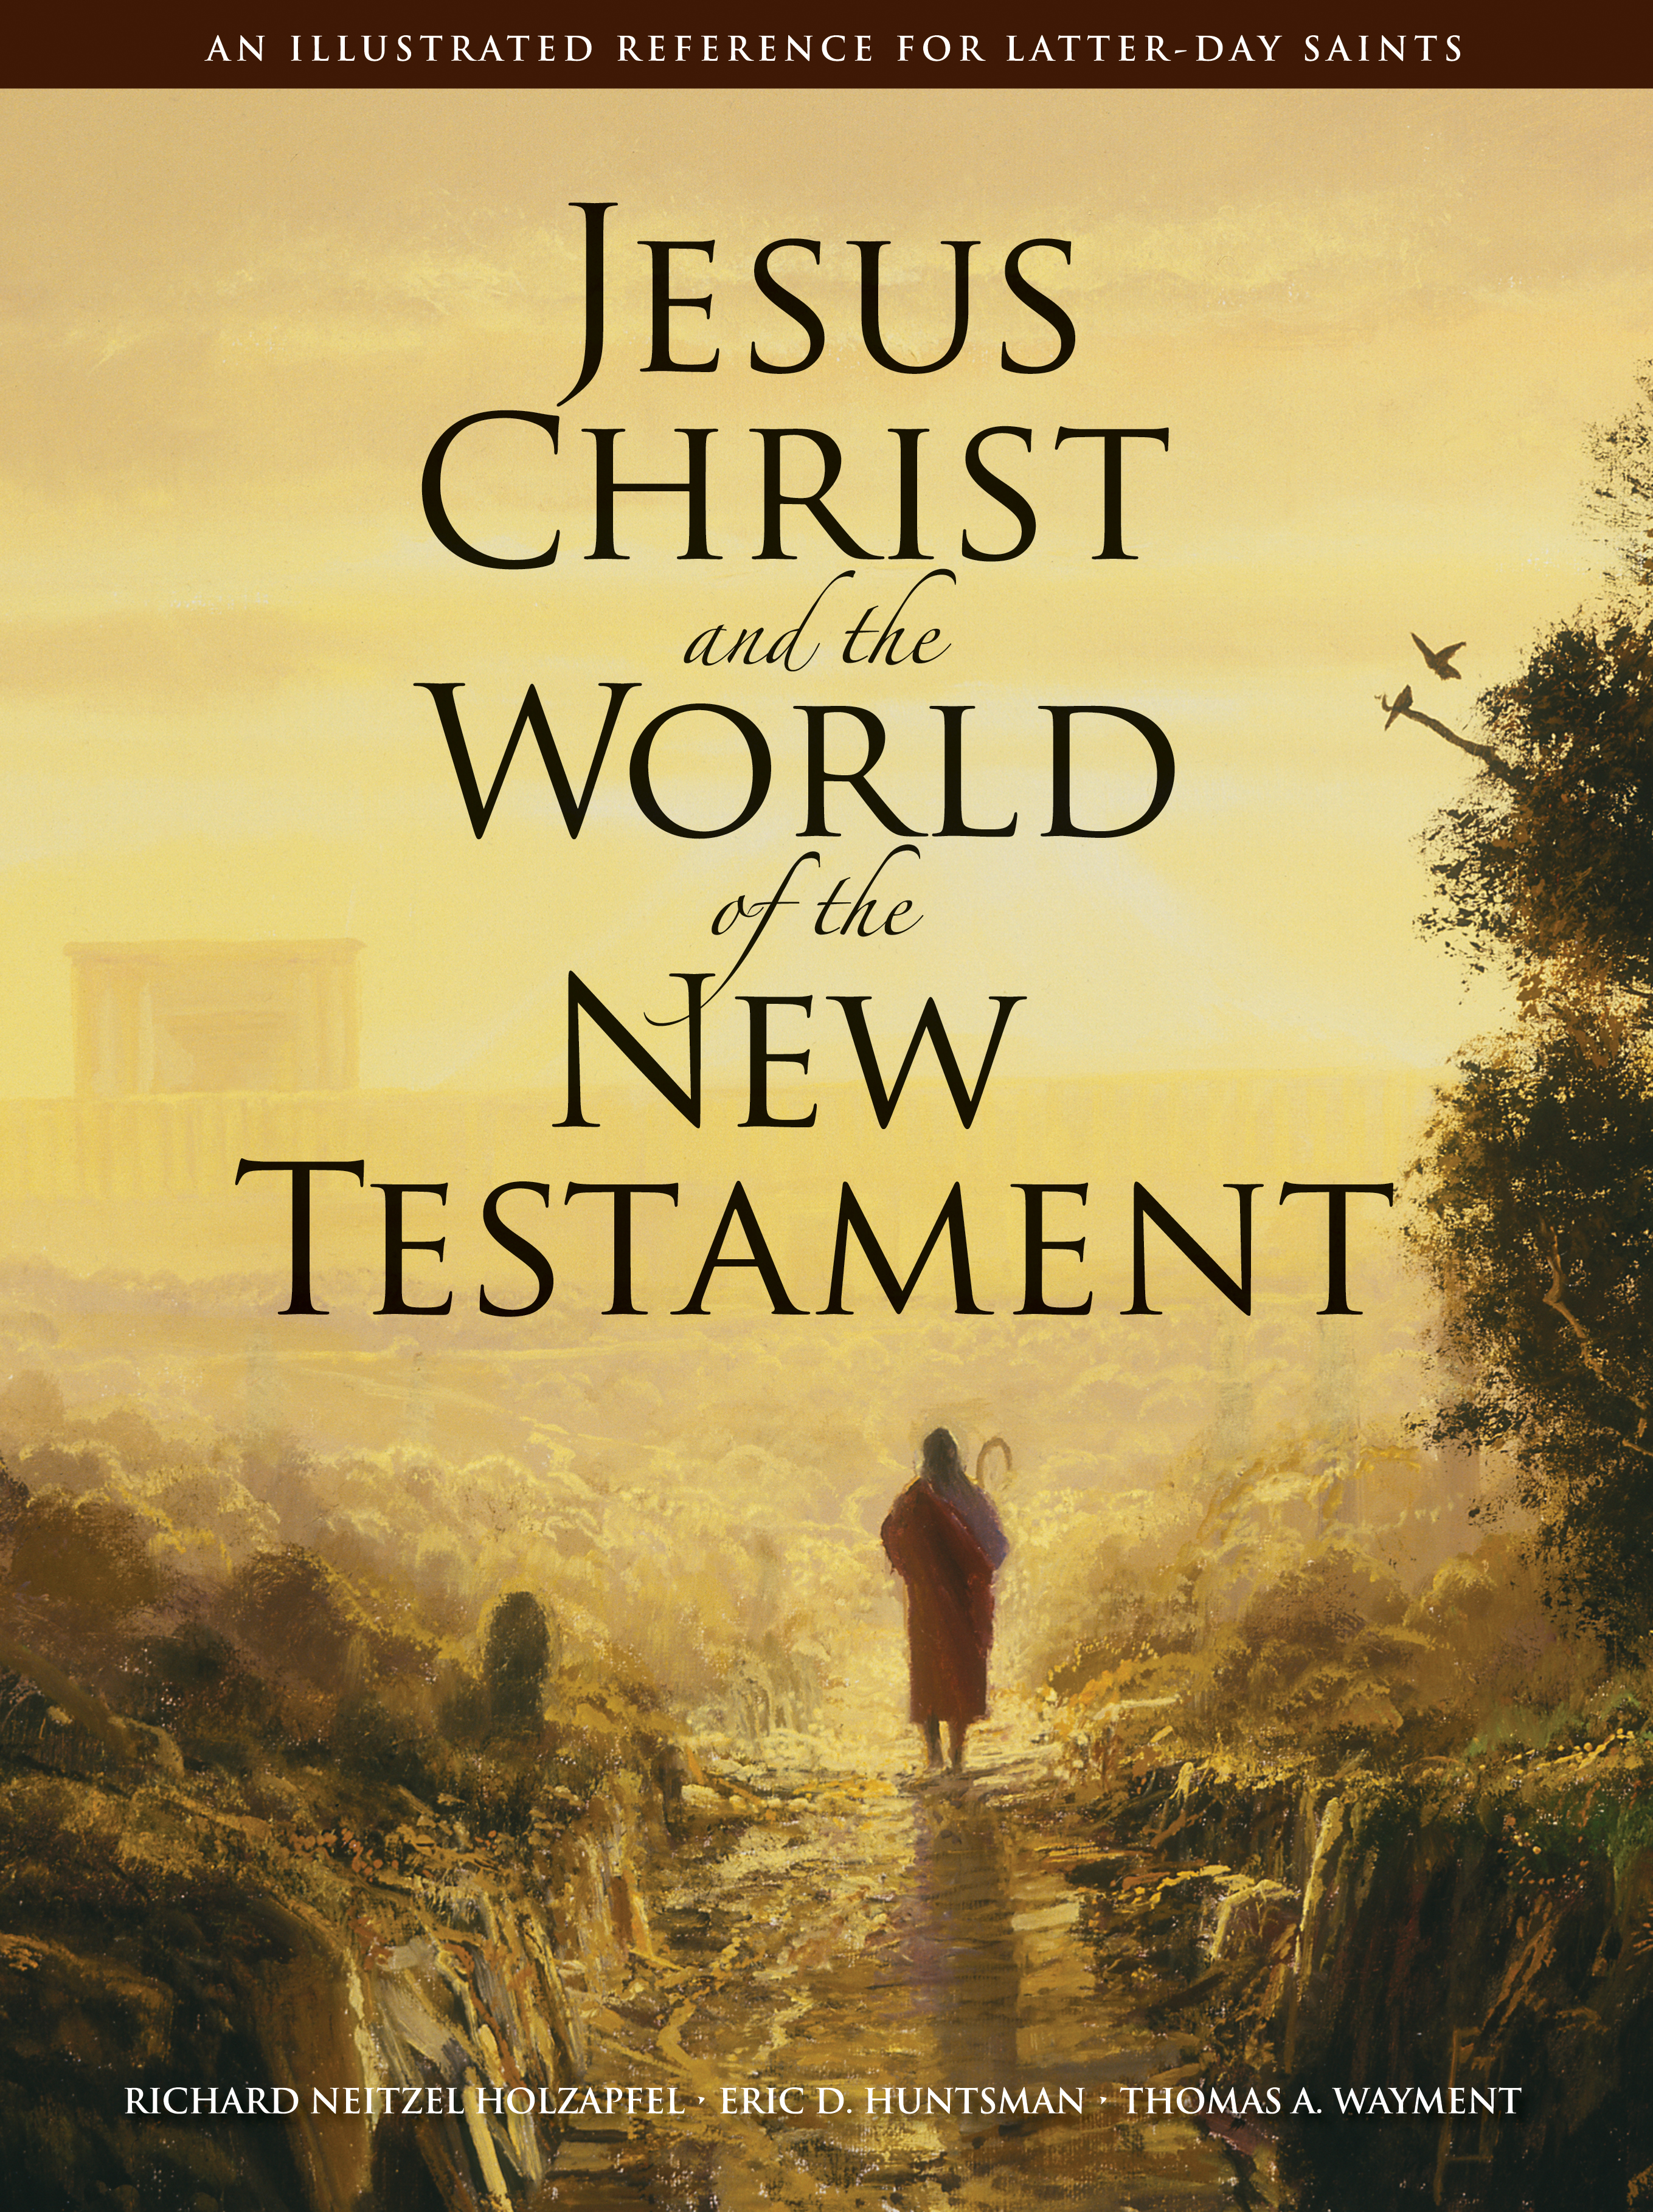 Jesus Christ and the WOrld of the New Testament